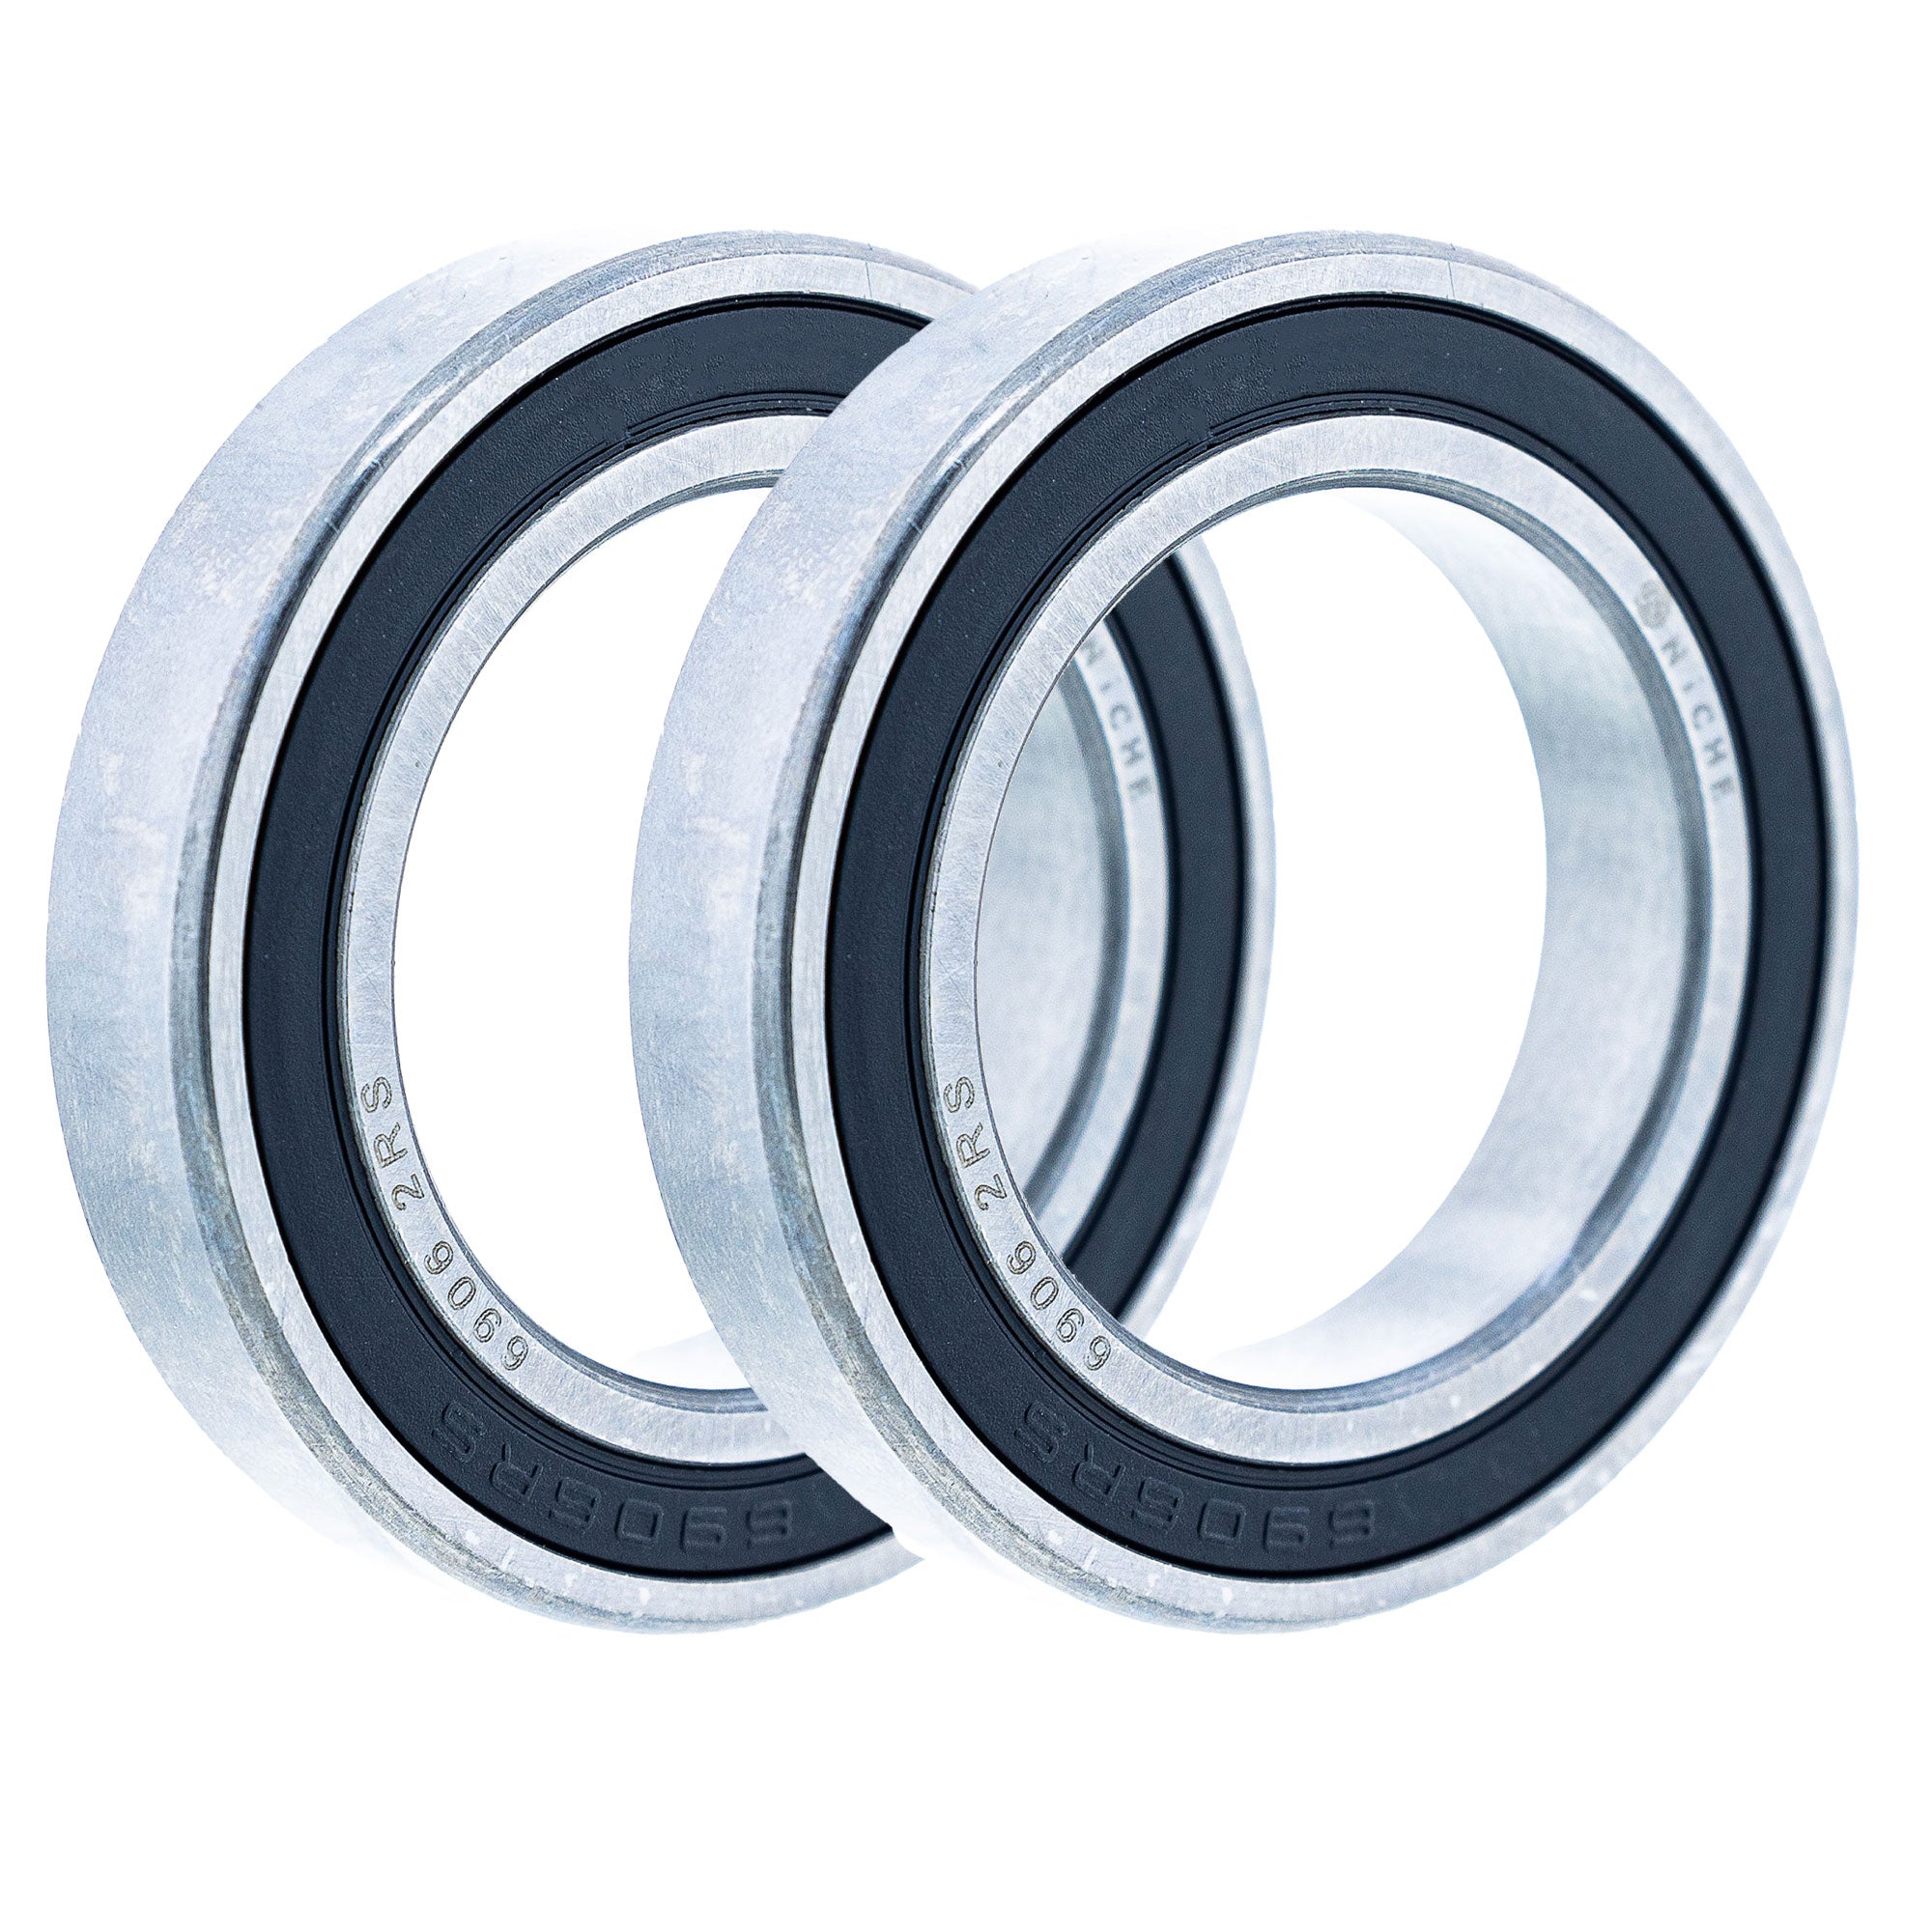 Single Row, Deep Groove, Ball Bearing Pack of 2 2-Pack for zOTHER 990 950 85 690 NICHE 519-CBB2250R